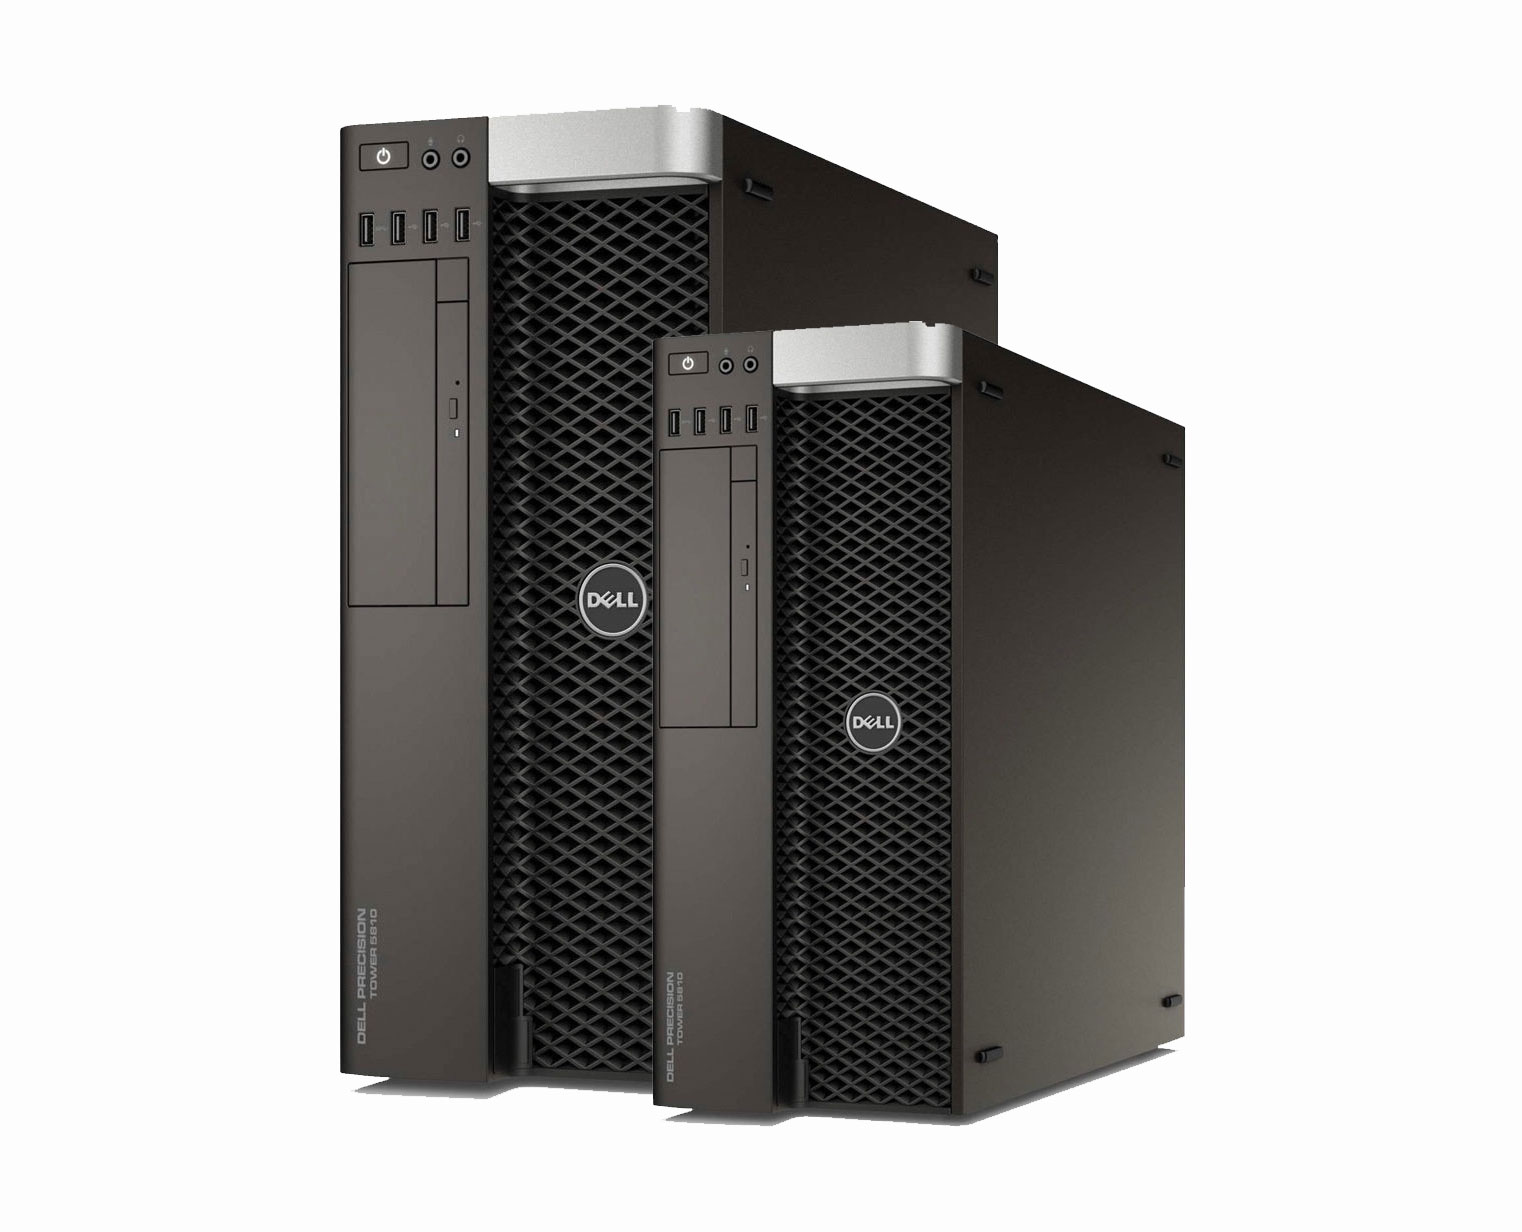 Performance - Dell Precision Tower 5000 Series Tower